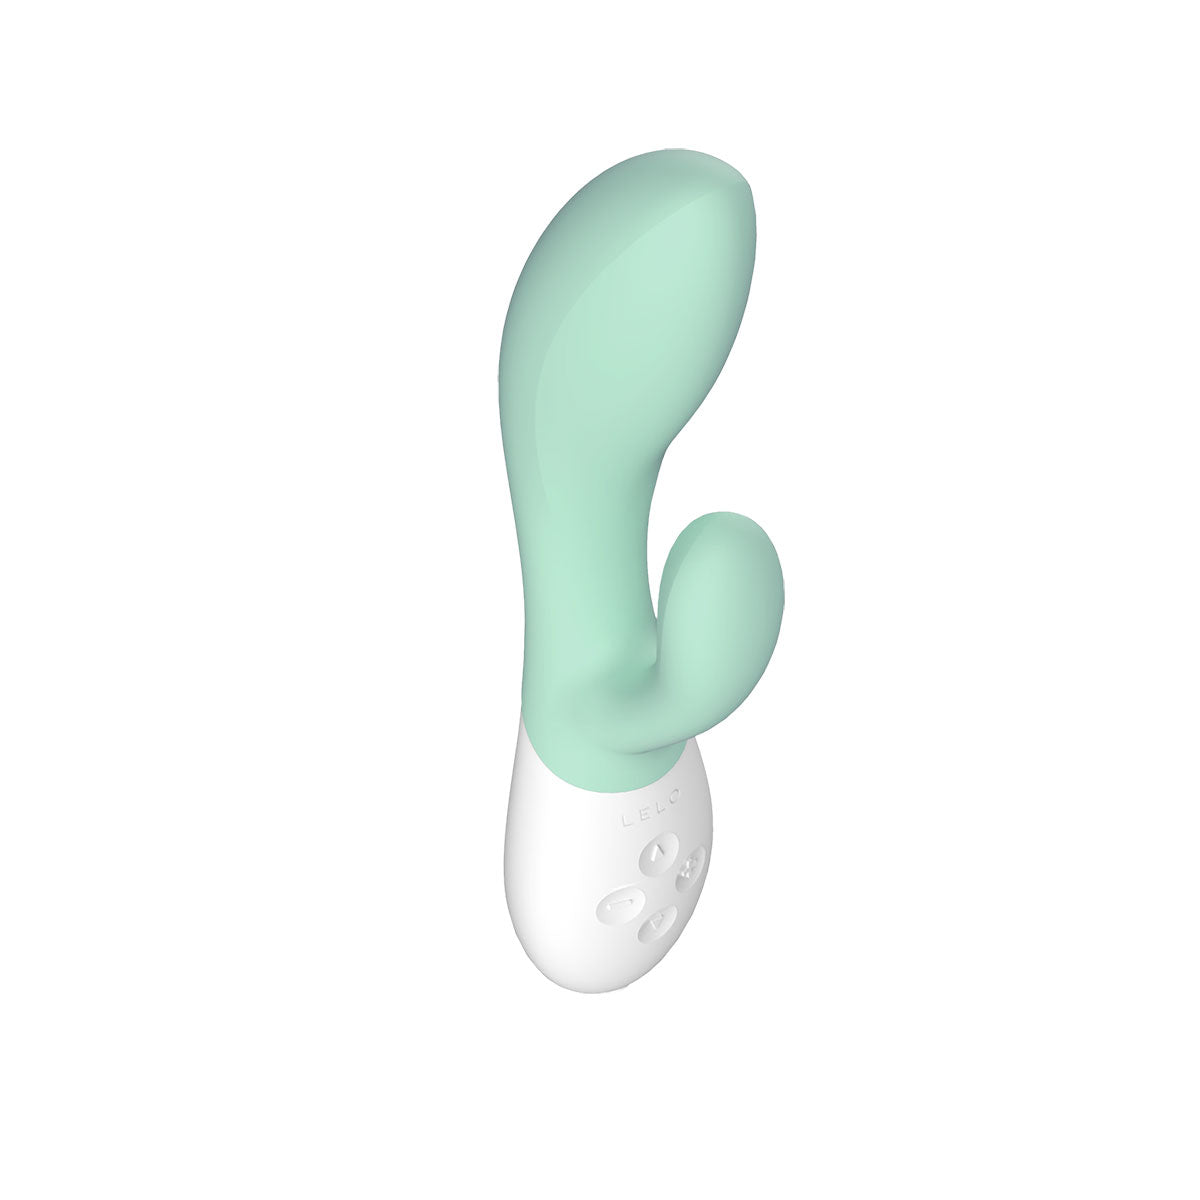 LELO Ina 3 - Seaweed Green Intimates Adult Boutique